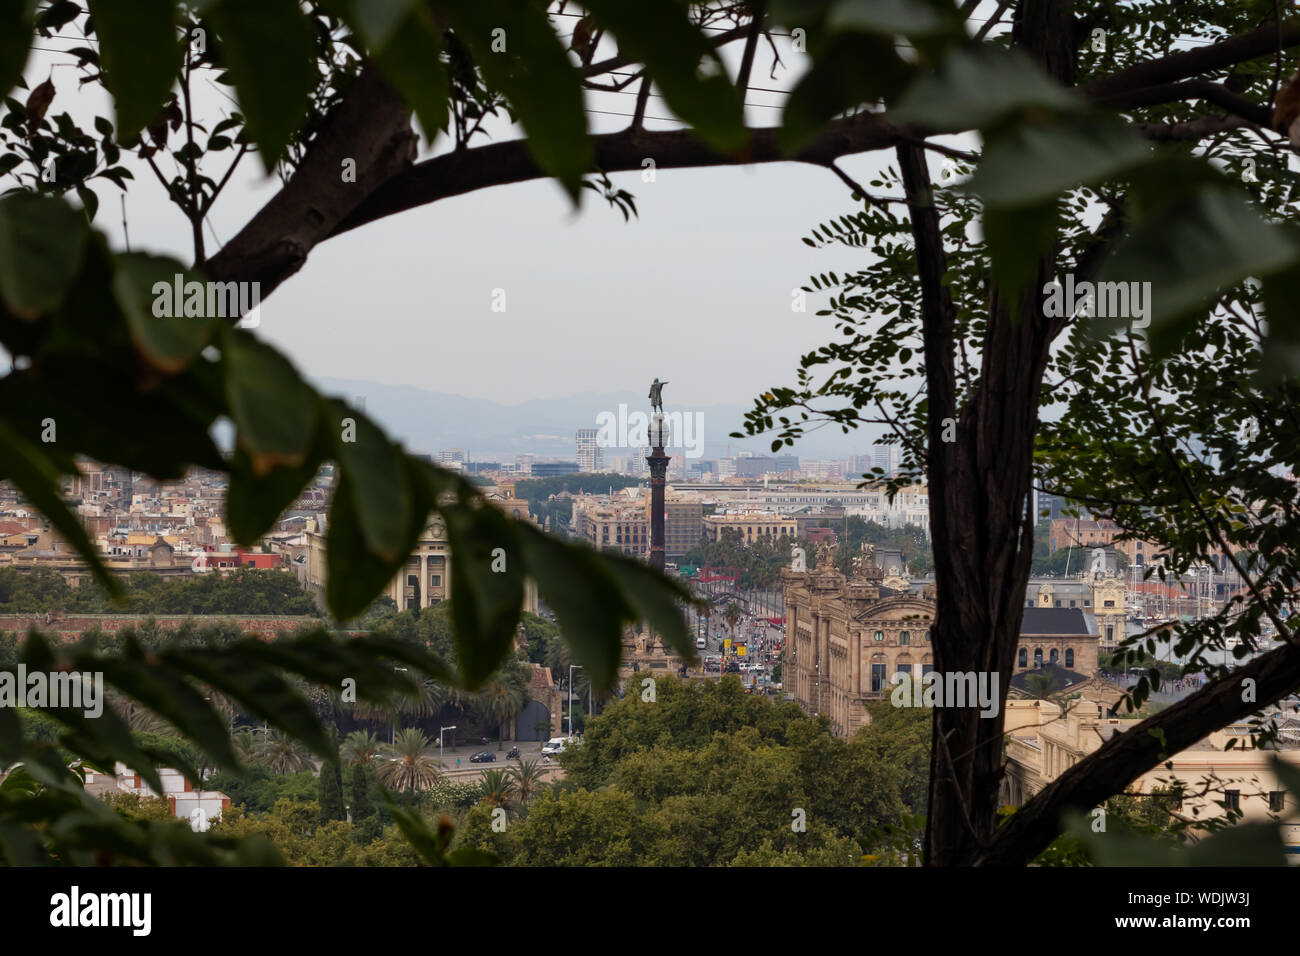 Barcelona's Christopher Columbus statue and Drassanes square seen between some trees. Stock Photo